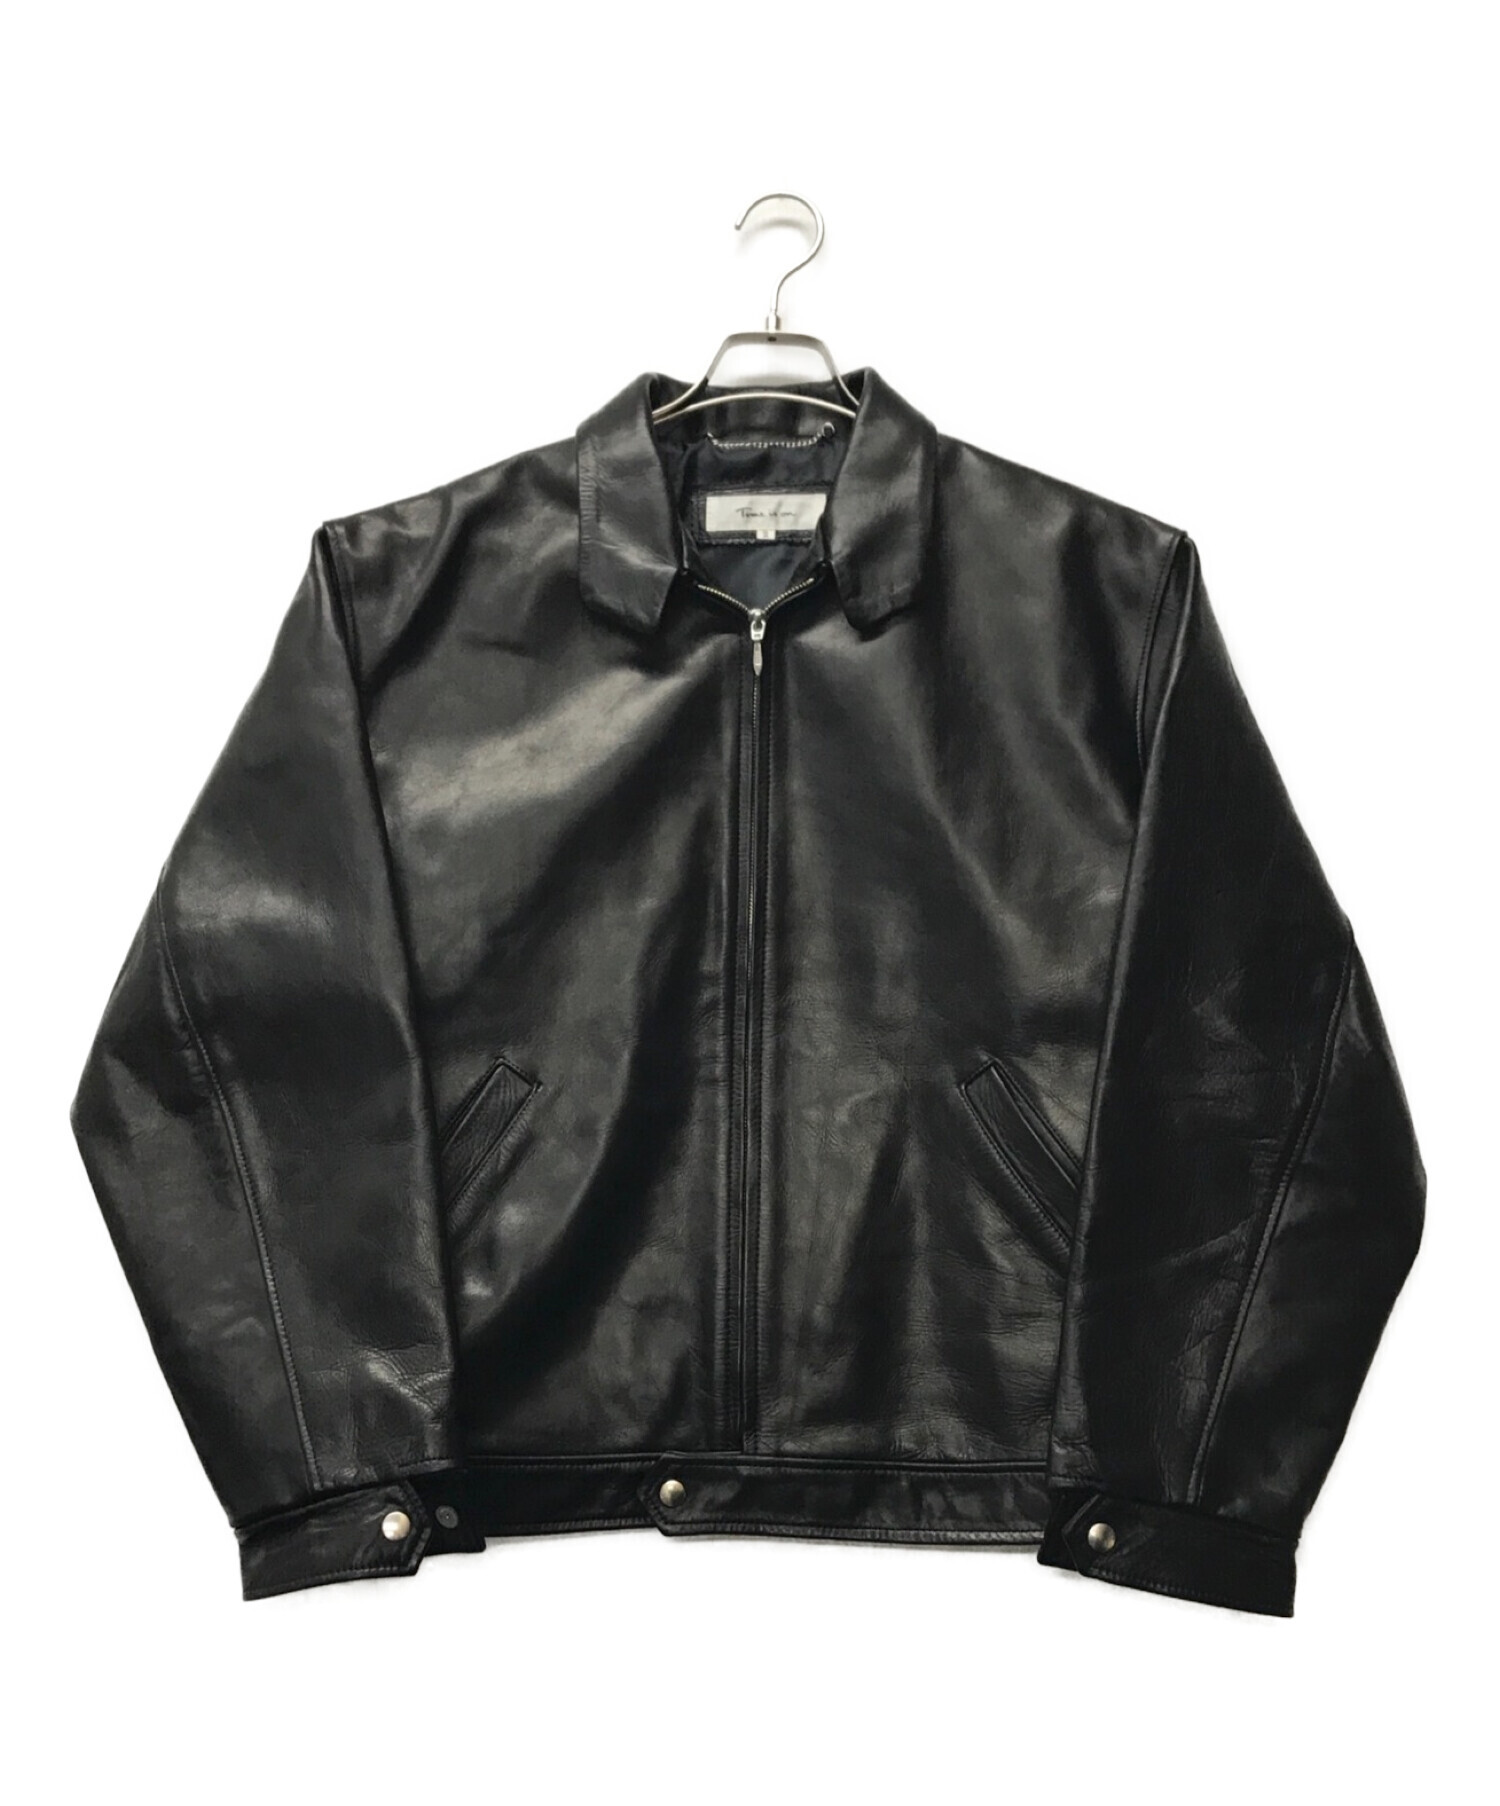 ZIA'S LEATHER JKT time is on